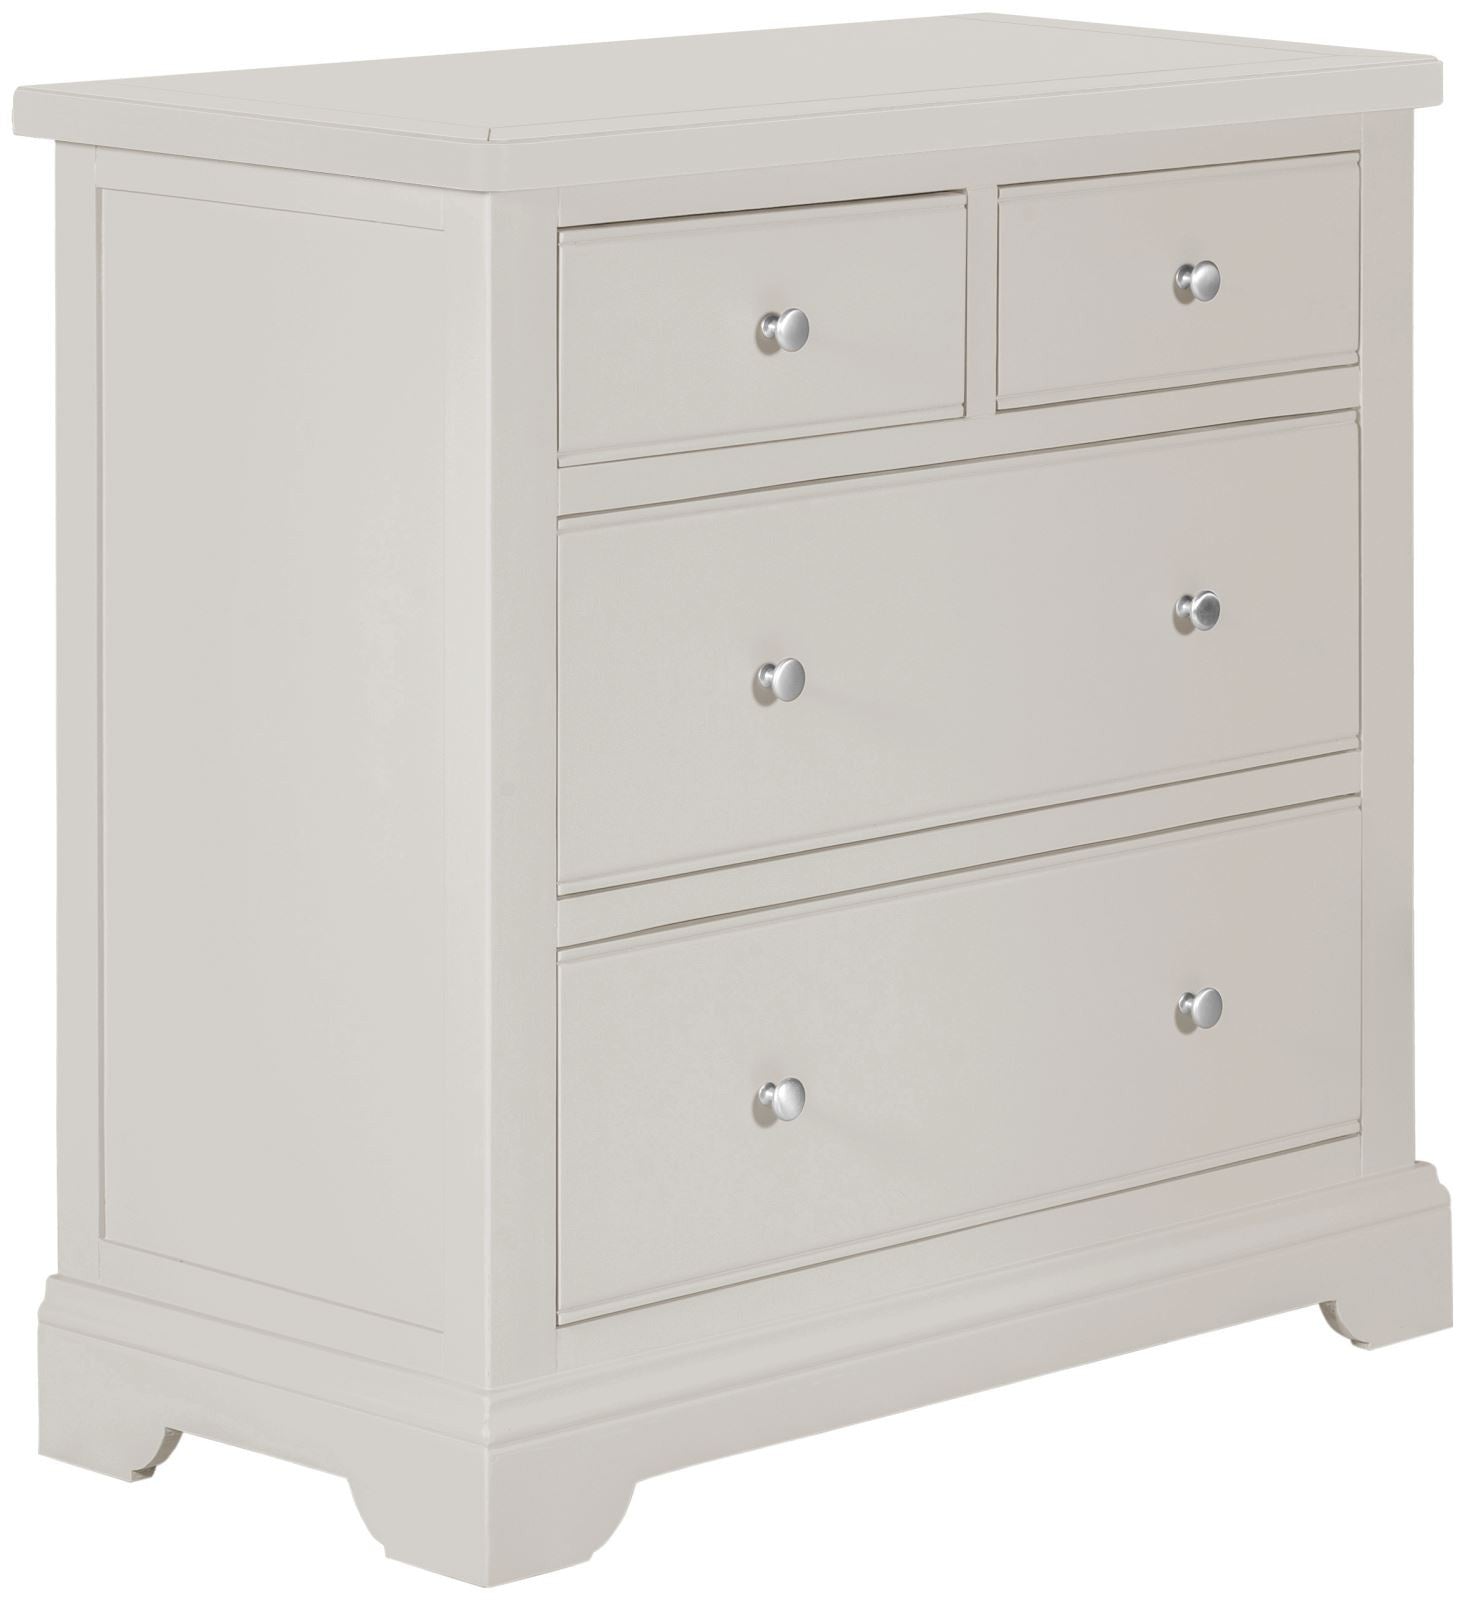 Cali 2 Over 2 Chest of Drawers